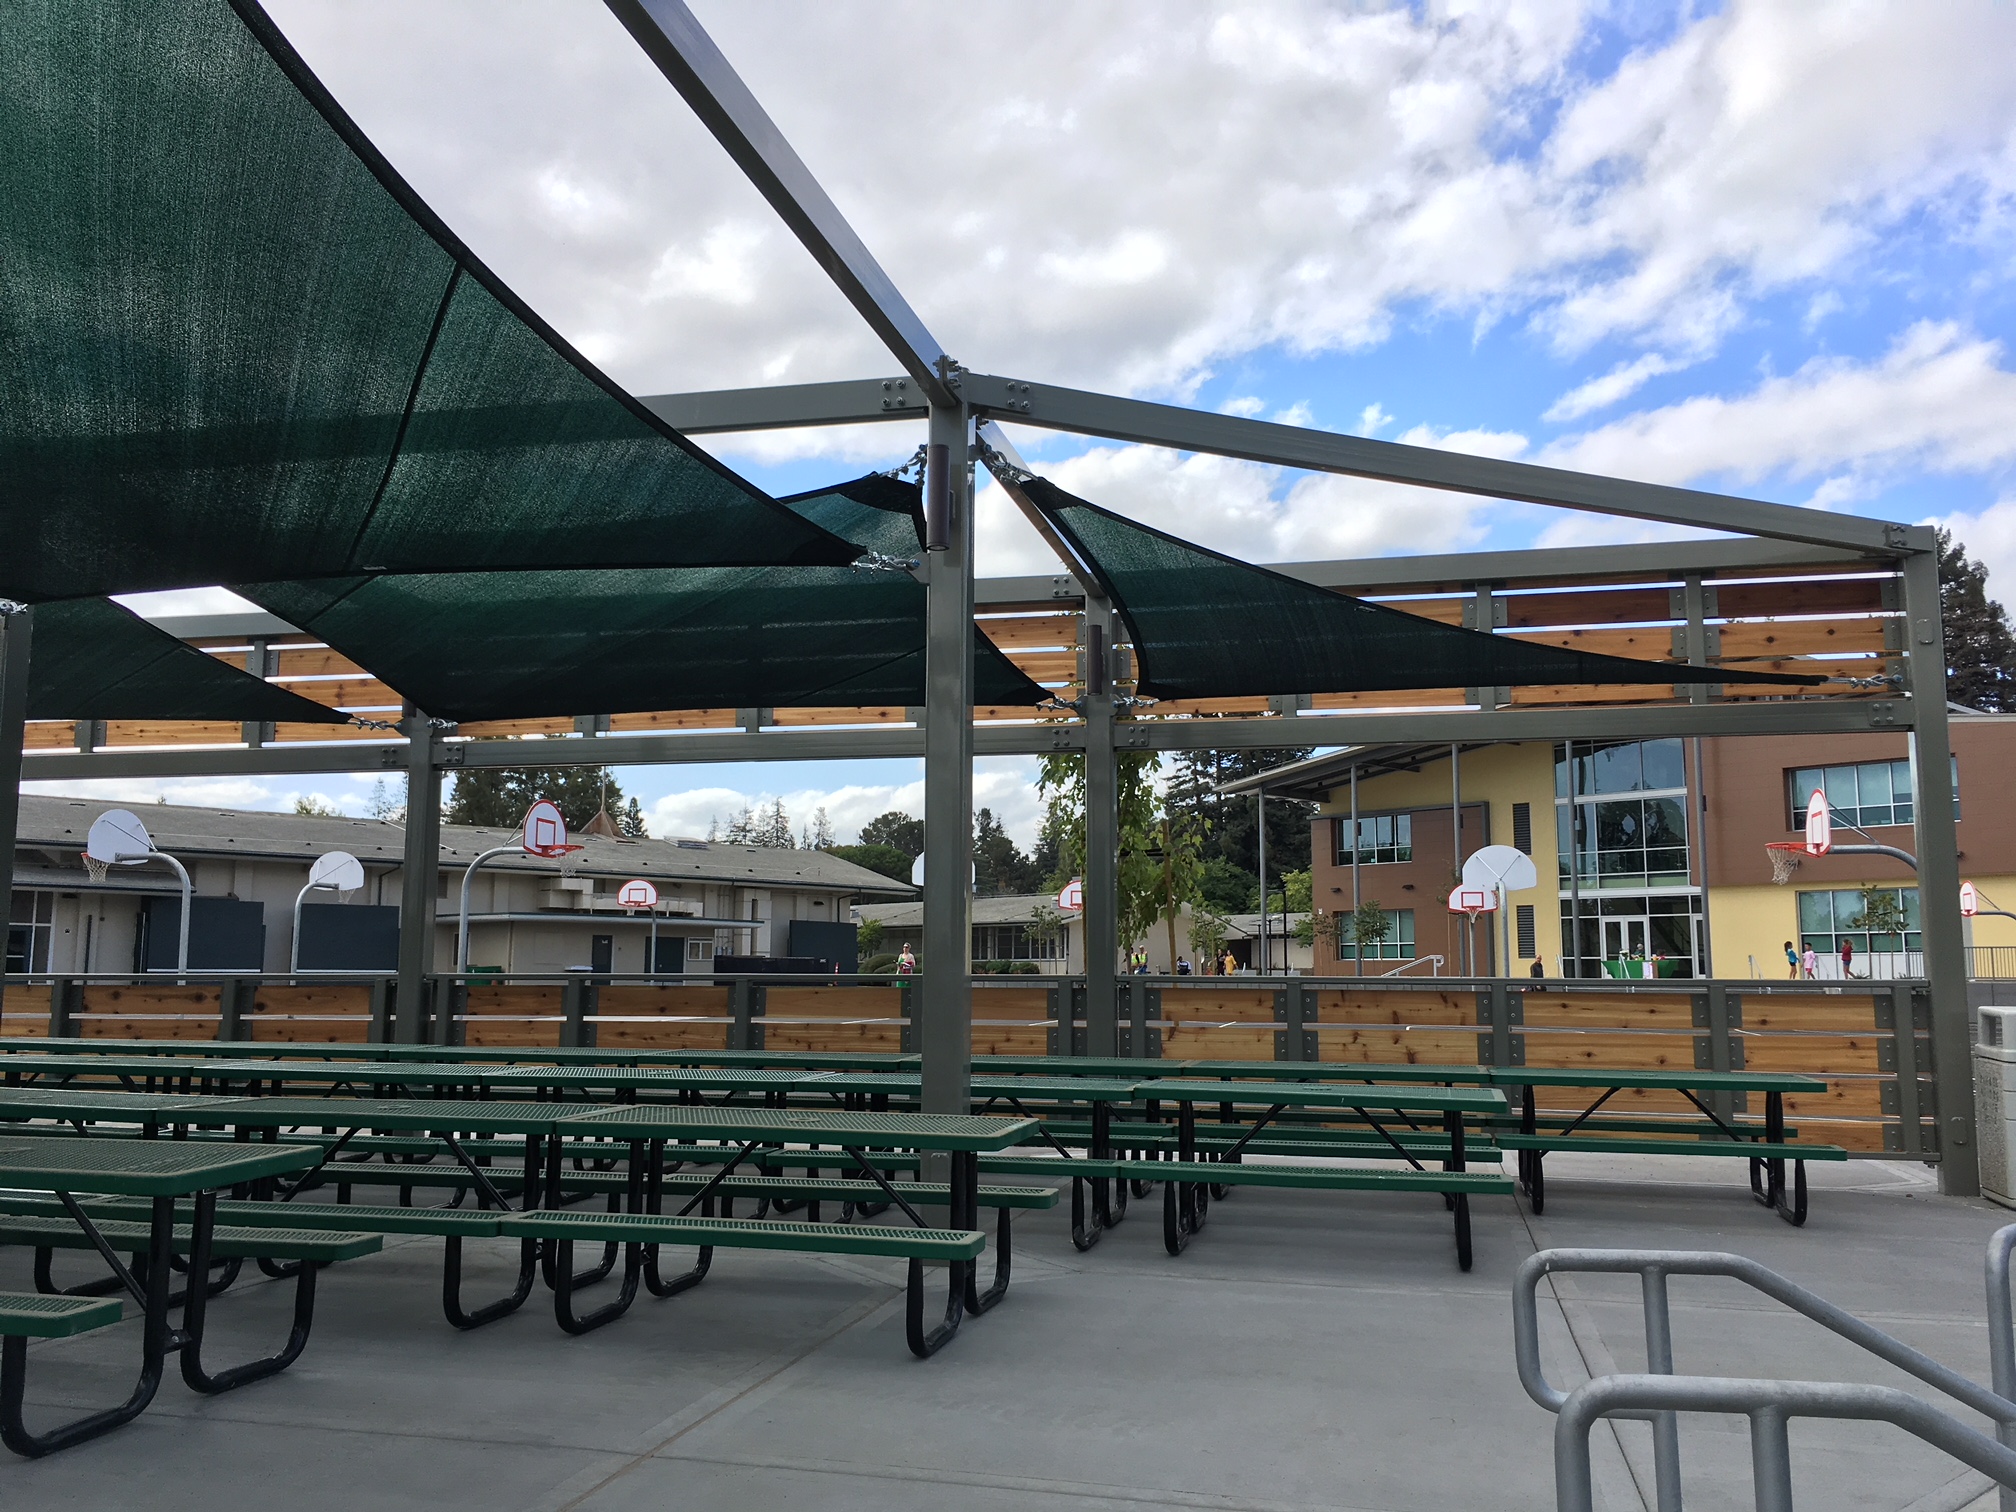 outdoor tables next to multiple basketball hoops